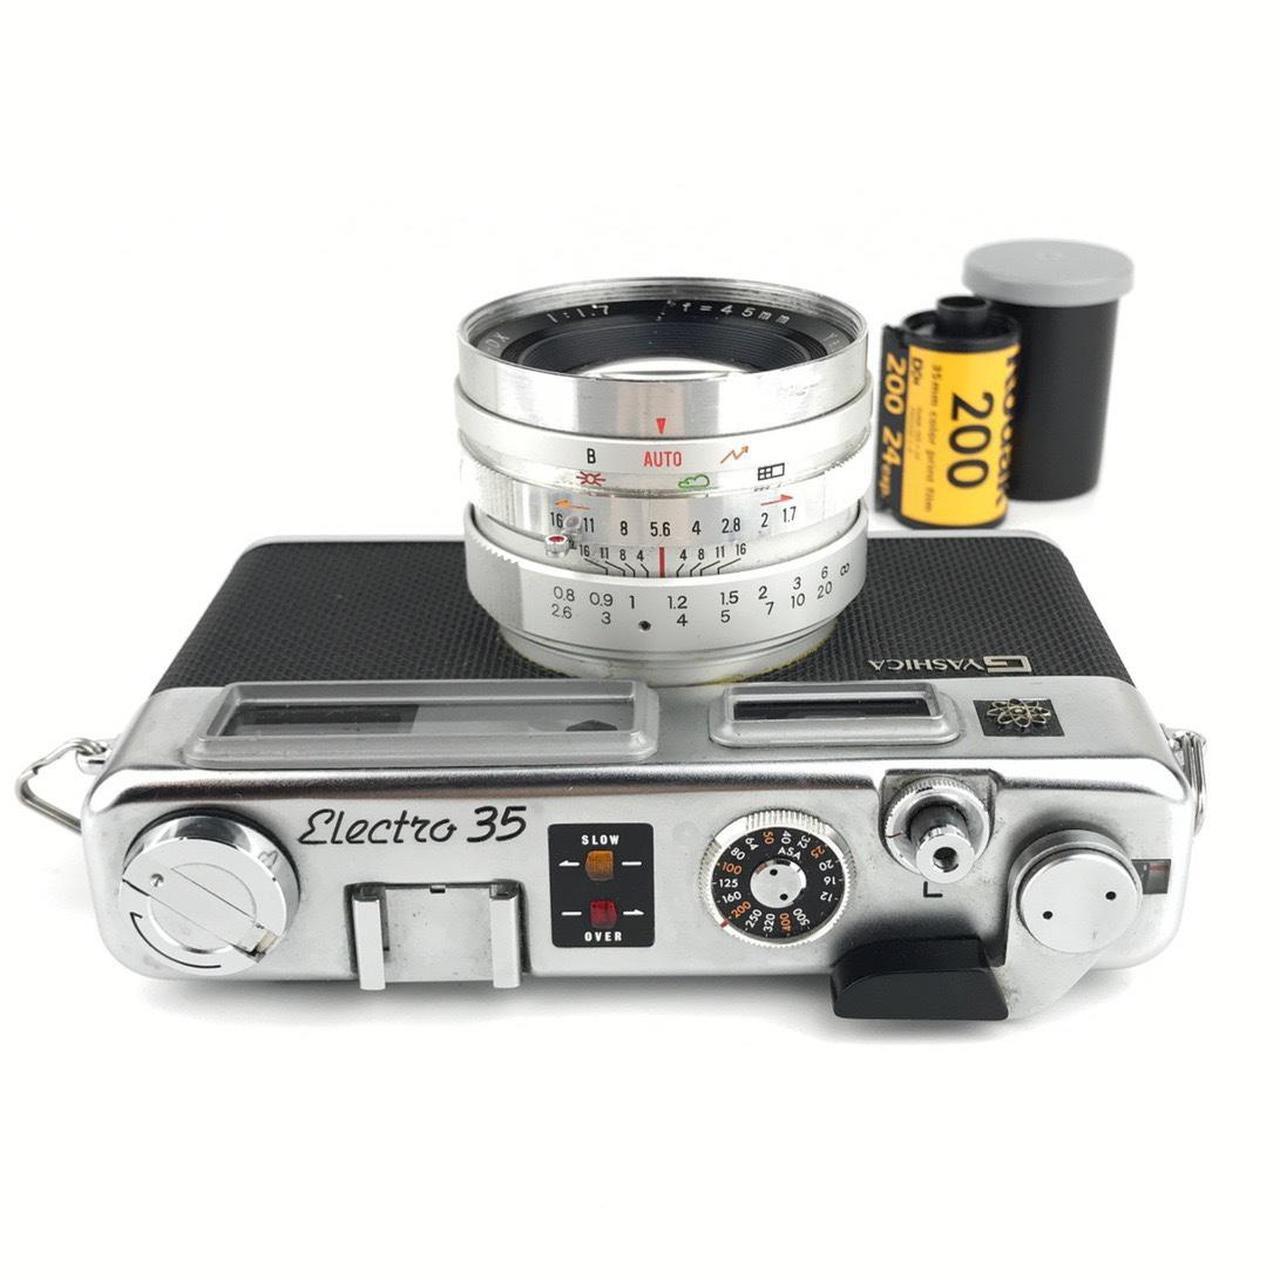 Yashica Cameras-and-accessories (2)